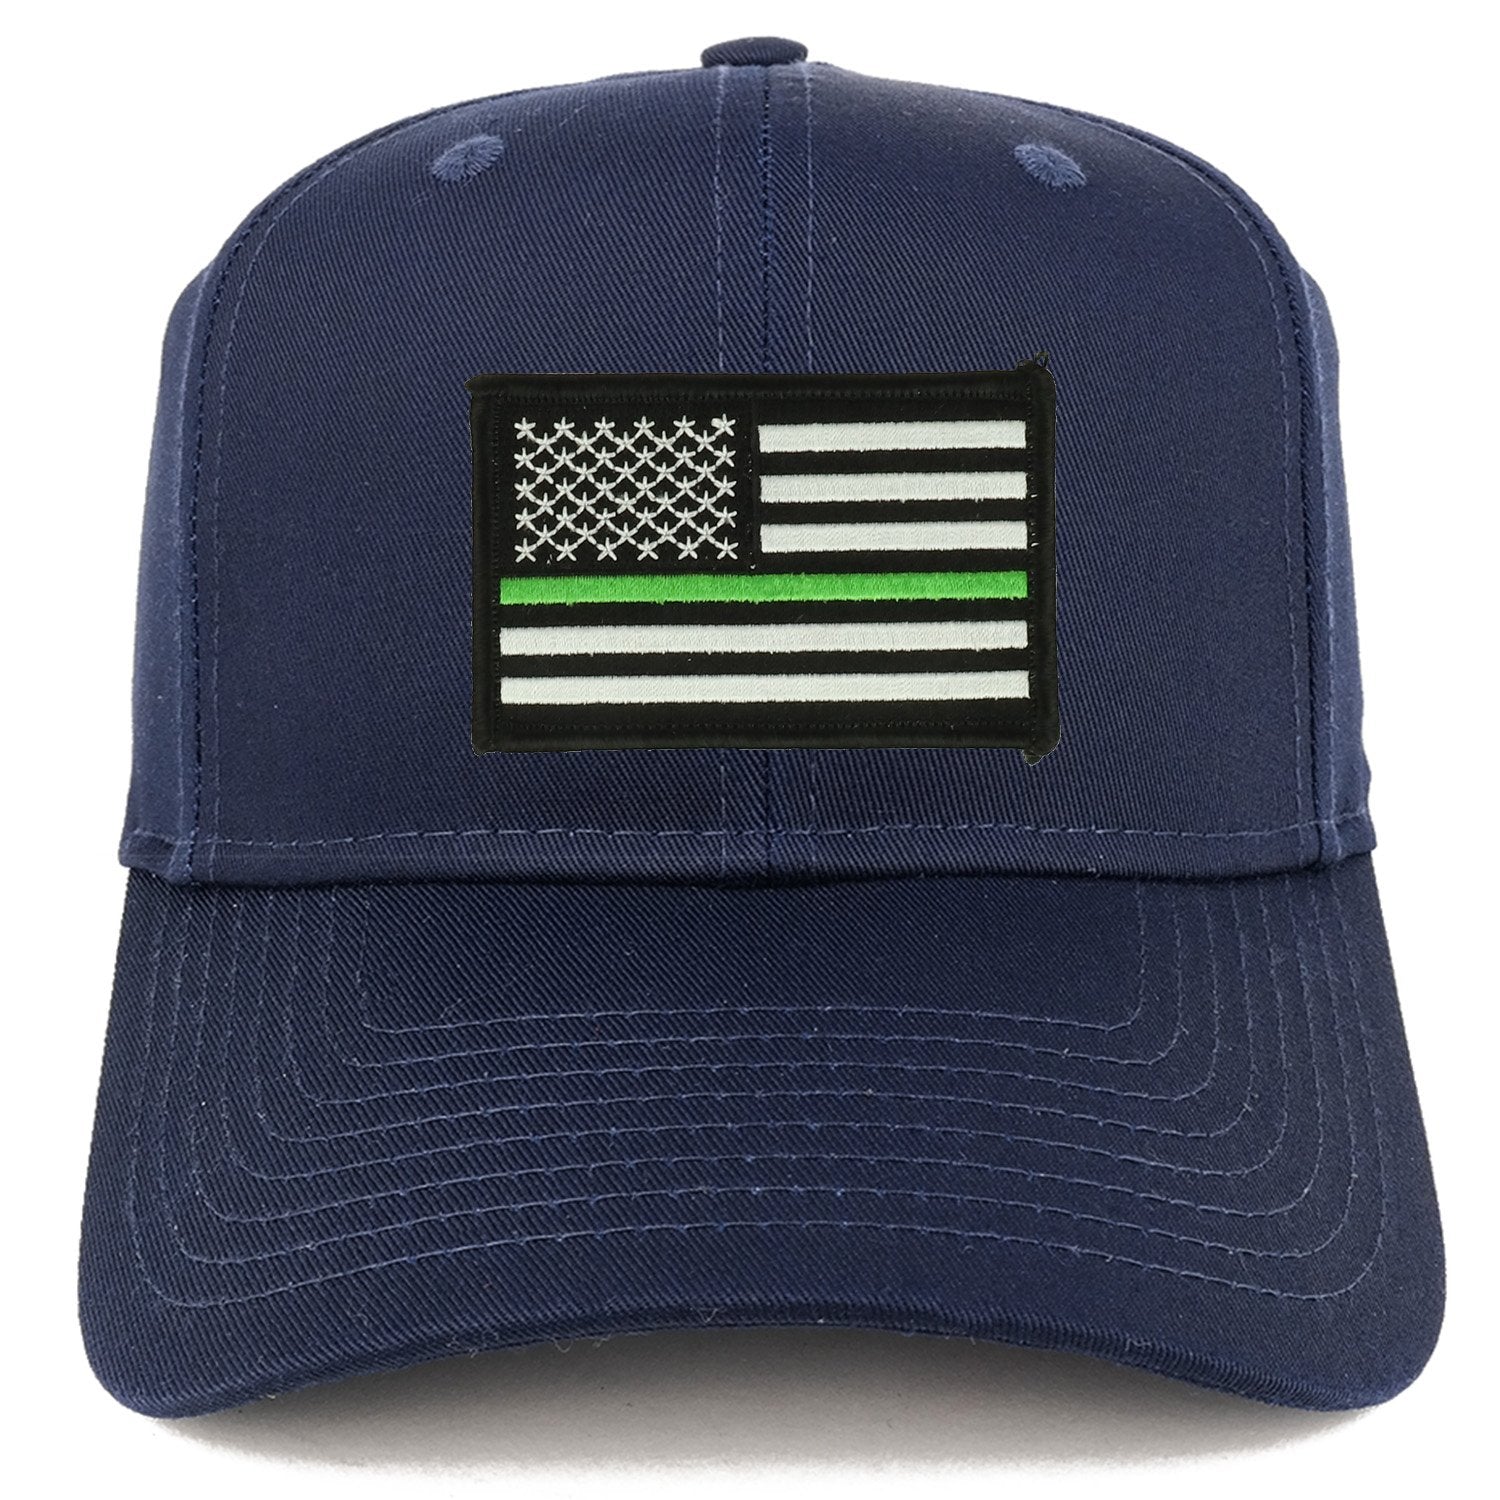 Armycrew Thin Green Line USA American Flag Logo Embroidered Iron On Patch Snap Back Cap